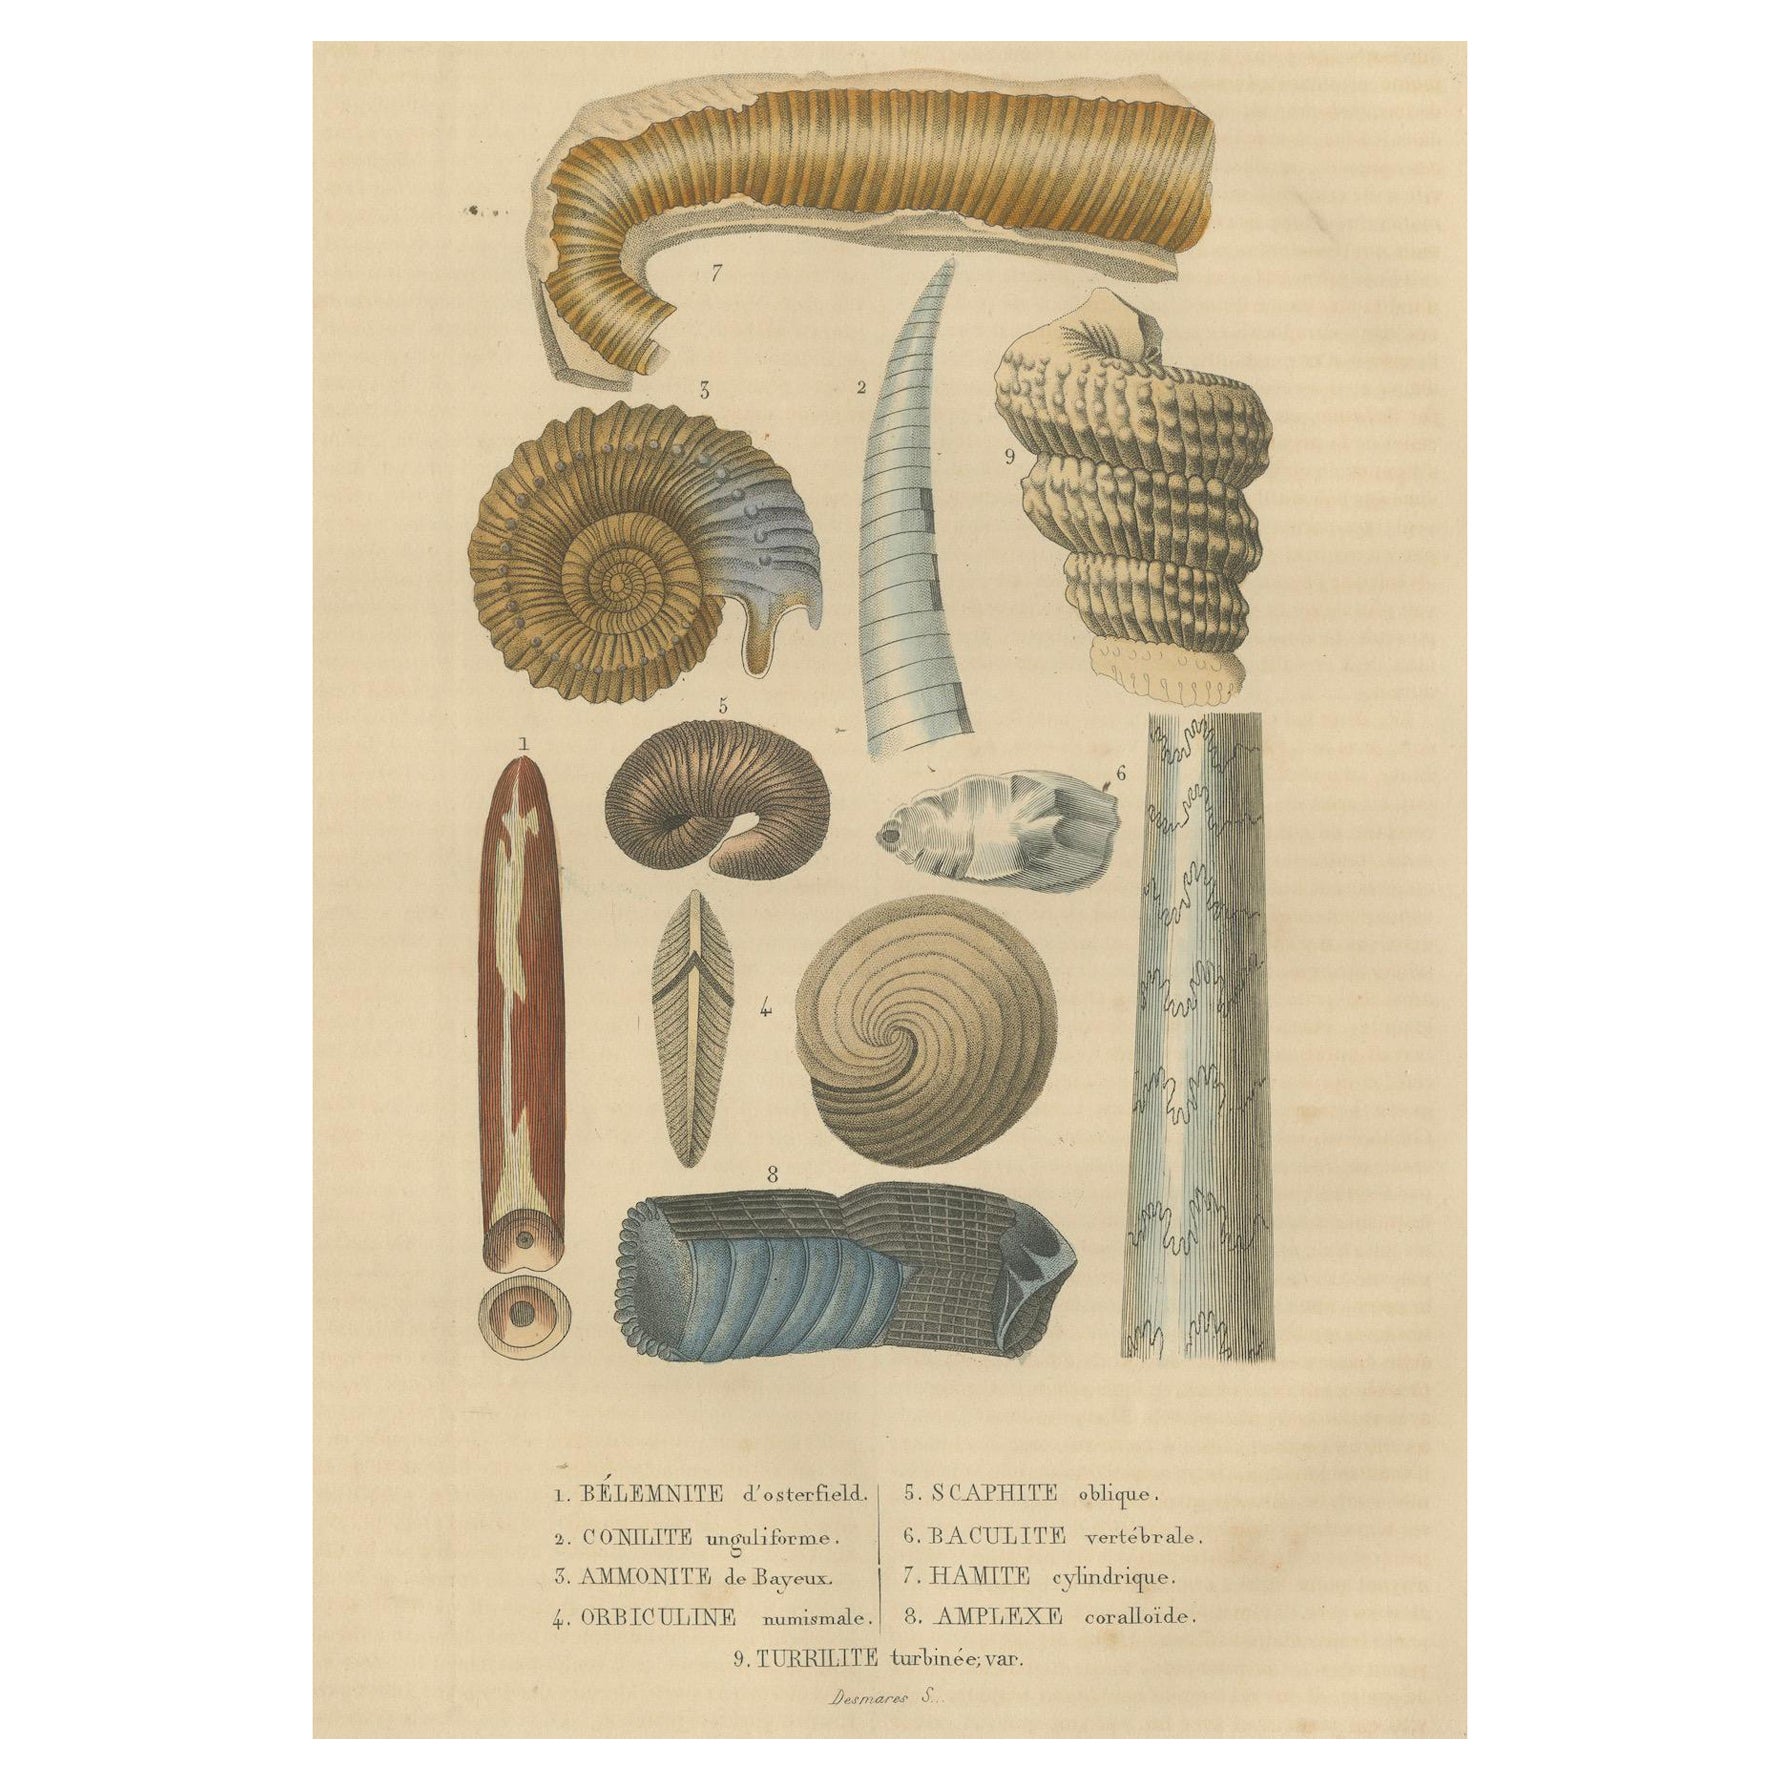 Ancient Marine Life: Handcolored Fossils of Cephalopods and Corals, 1845